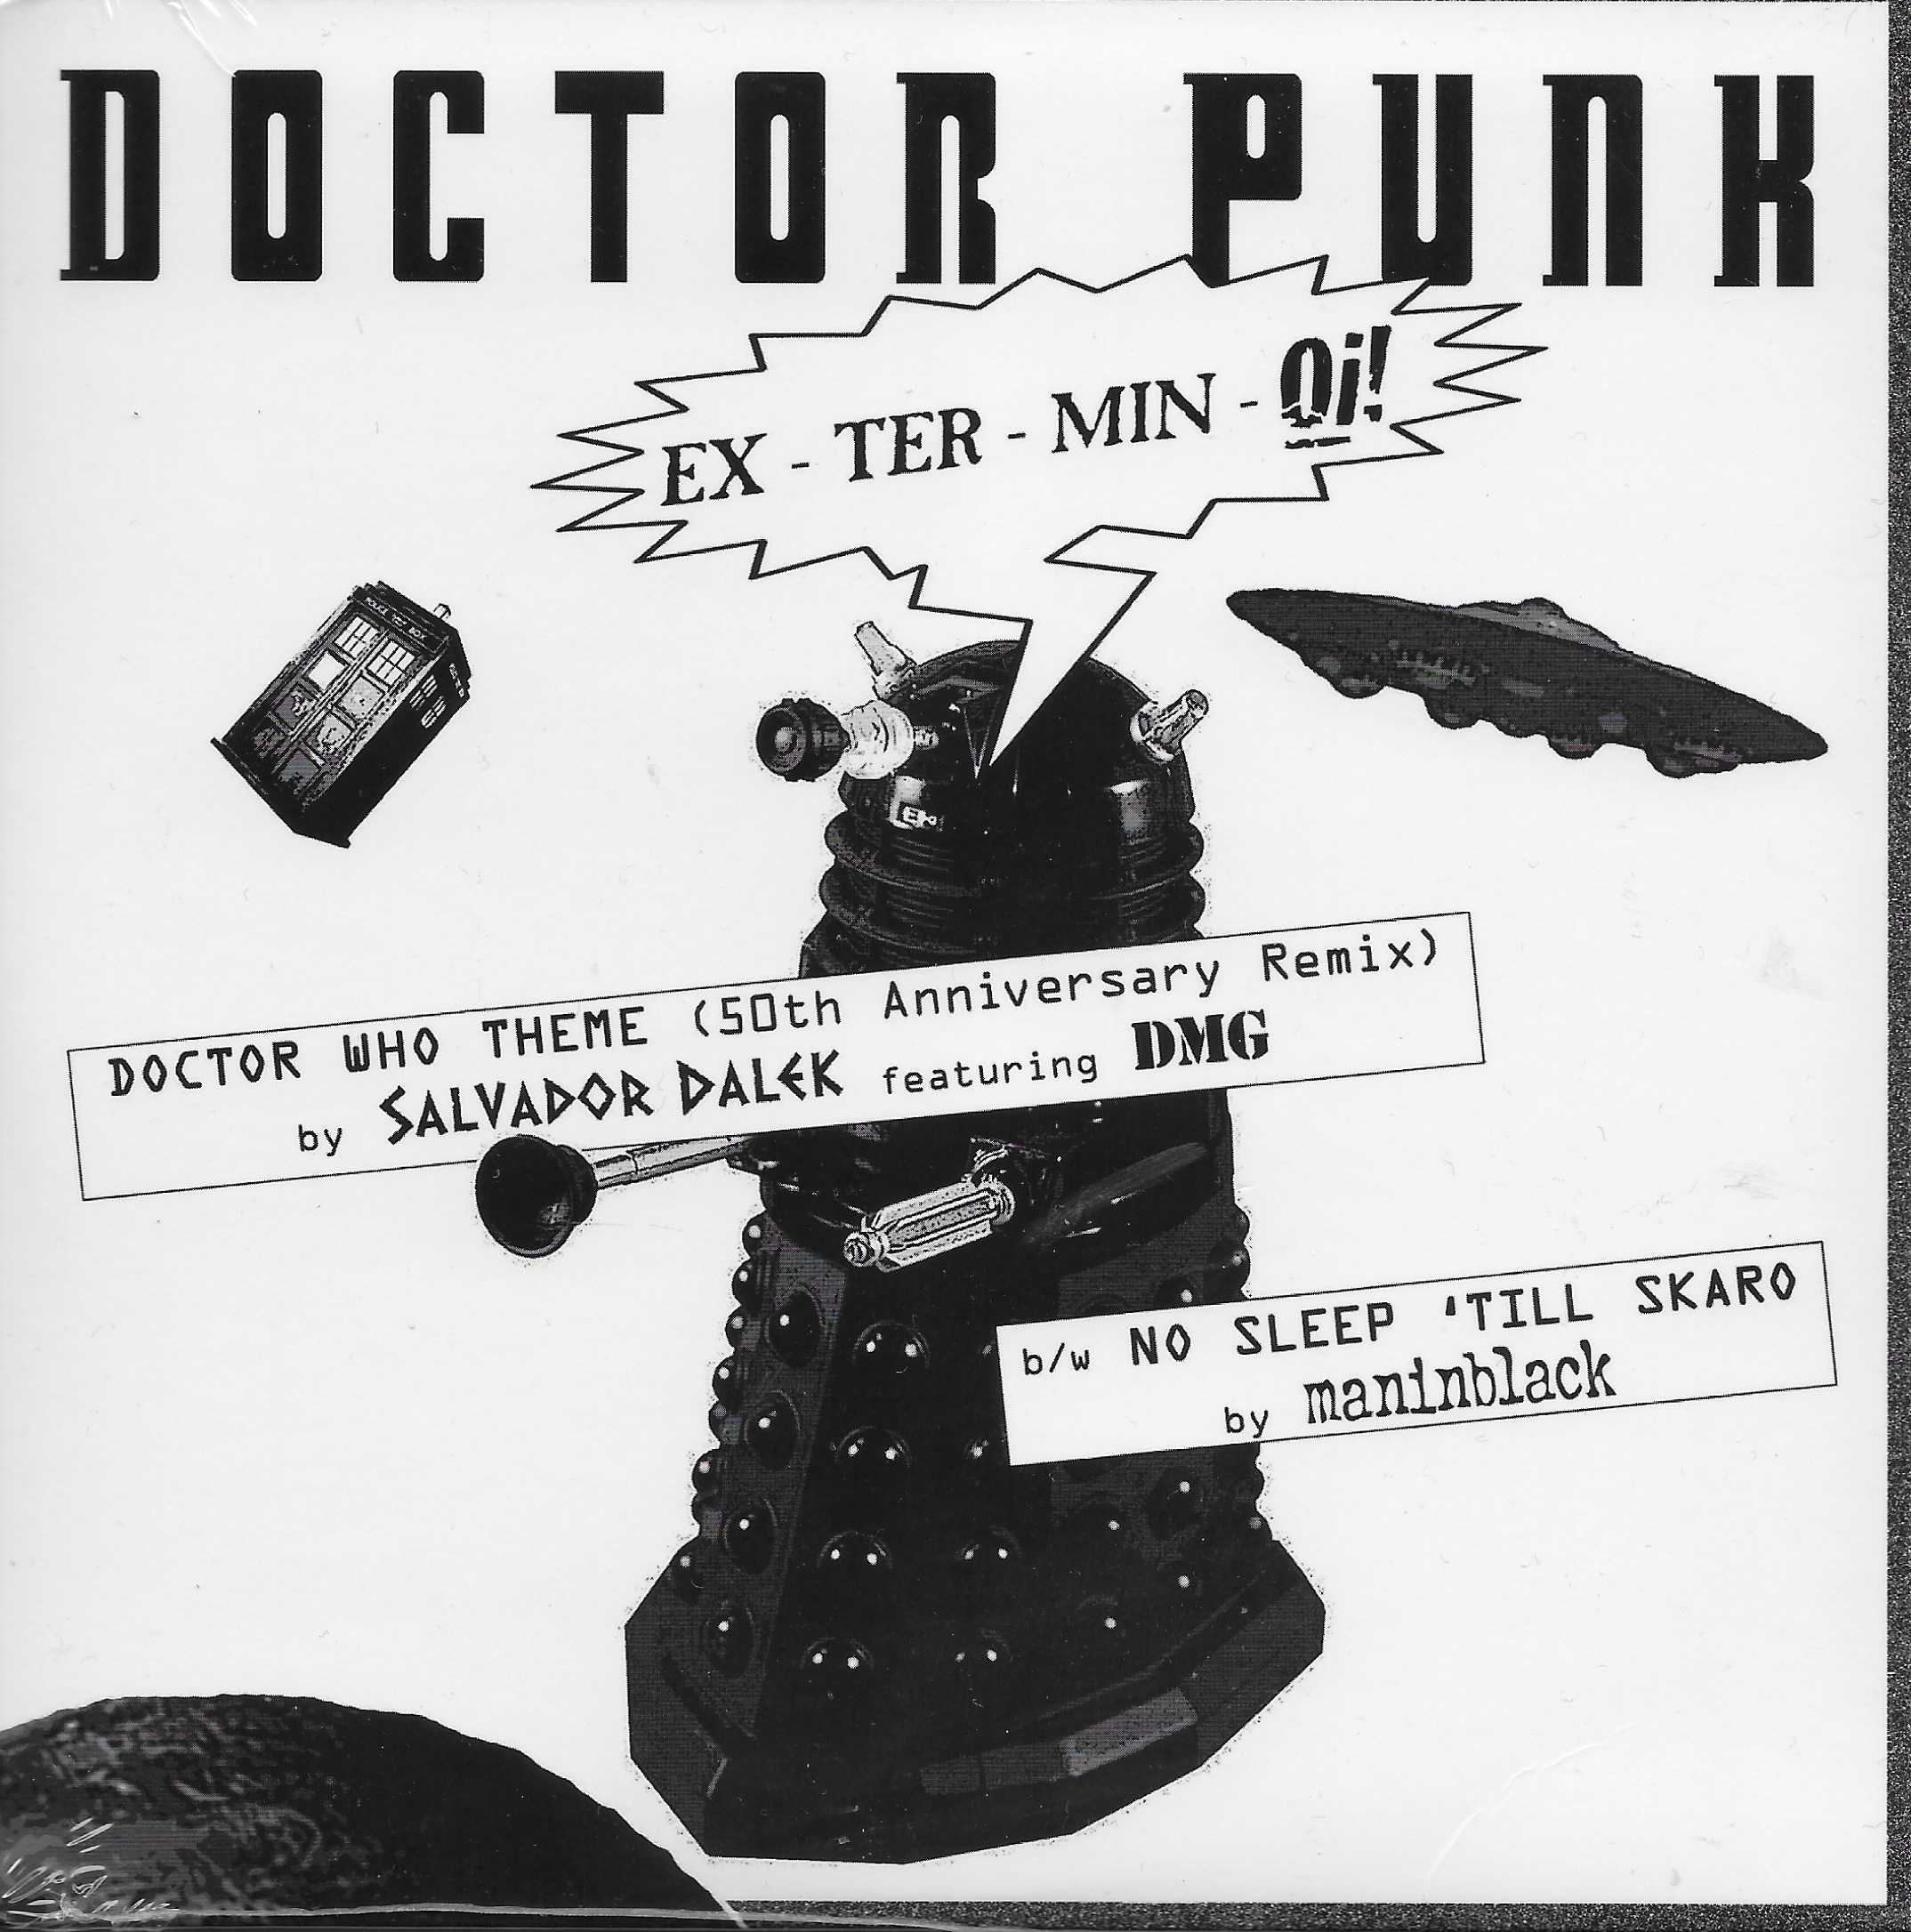 Picture of RAN 165 Doctor Who theme \(50th Anniversary Remix\) by artist Ron Grainer / DMG from the BBC records and Tapes library